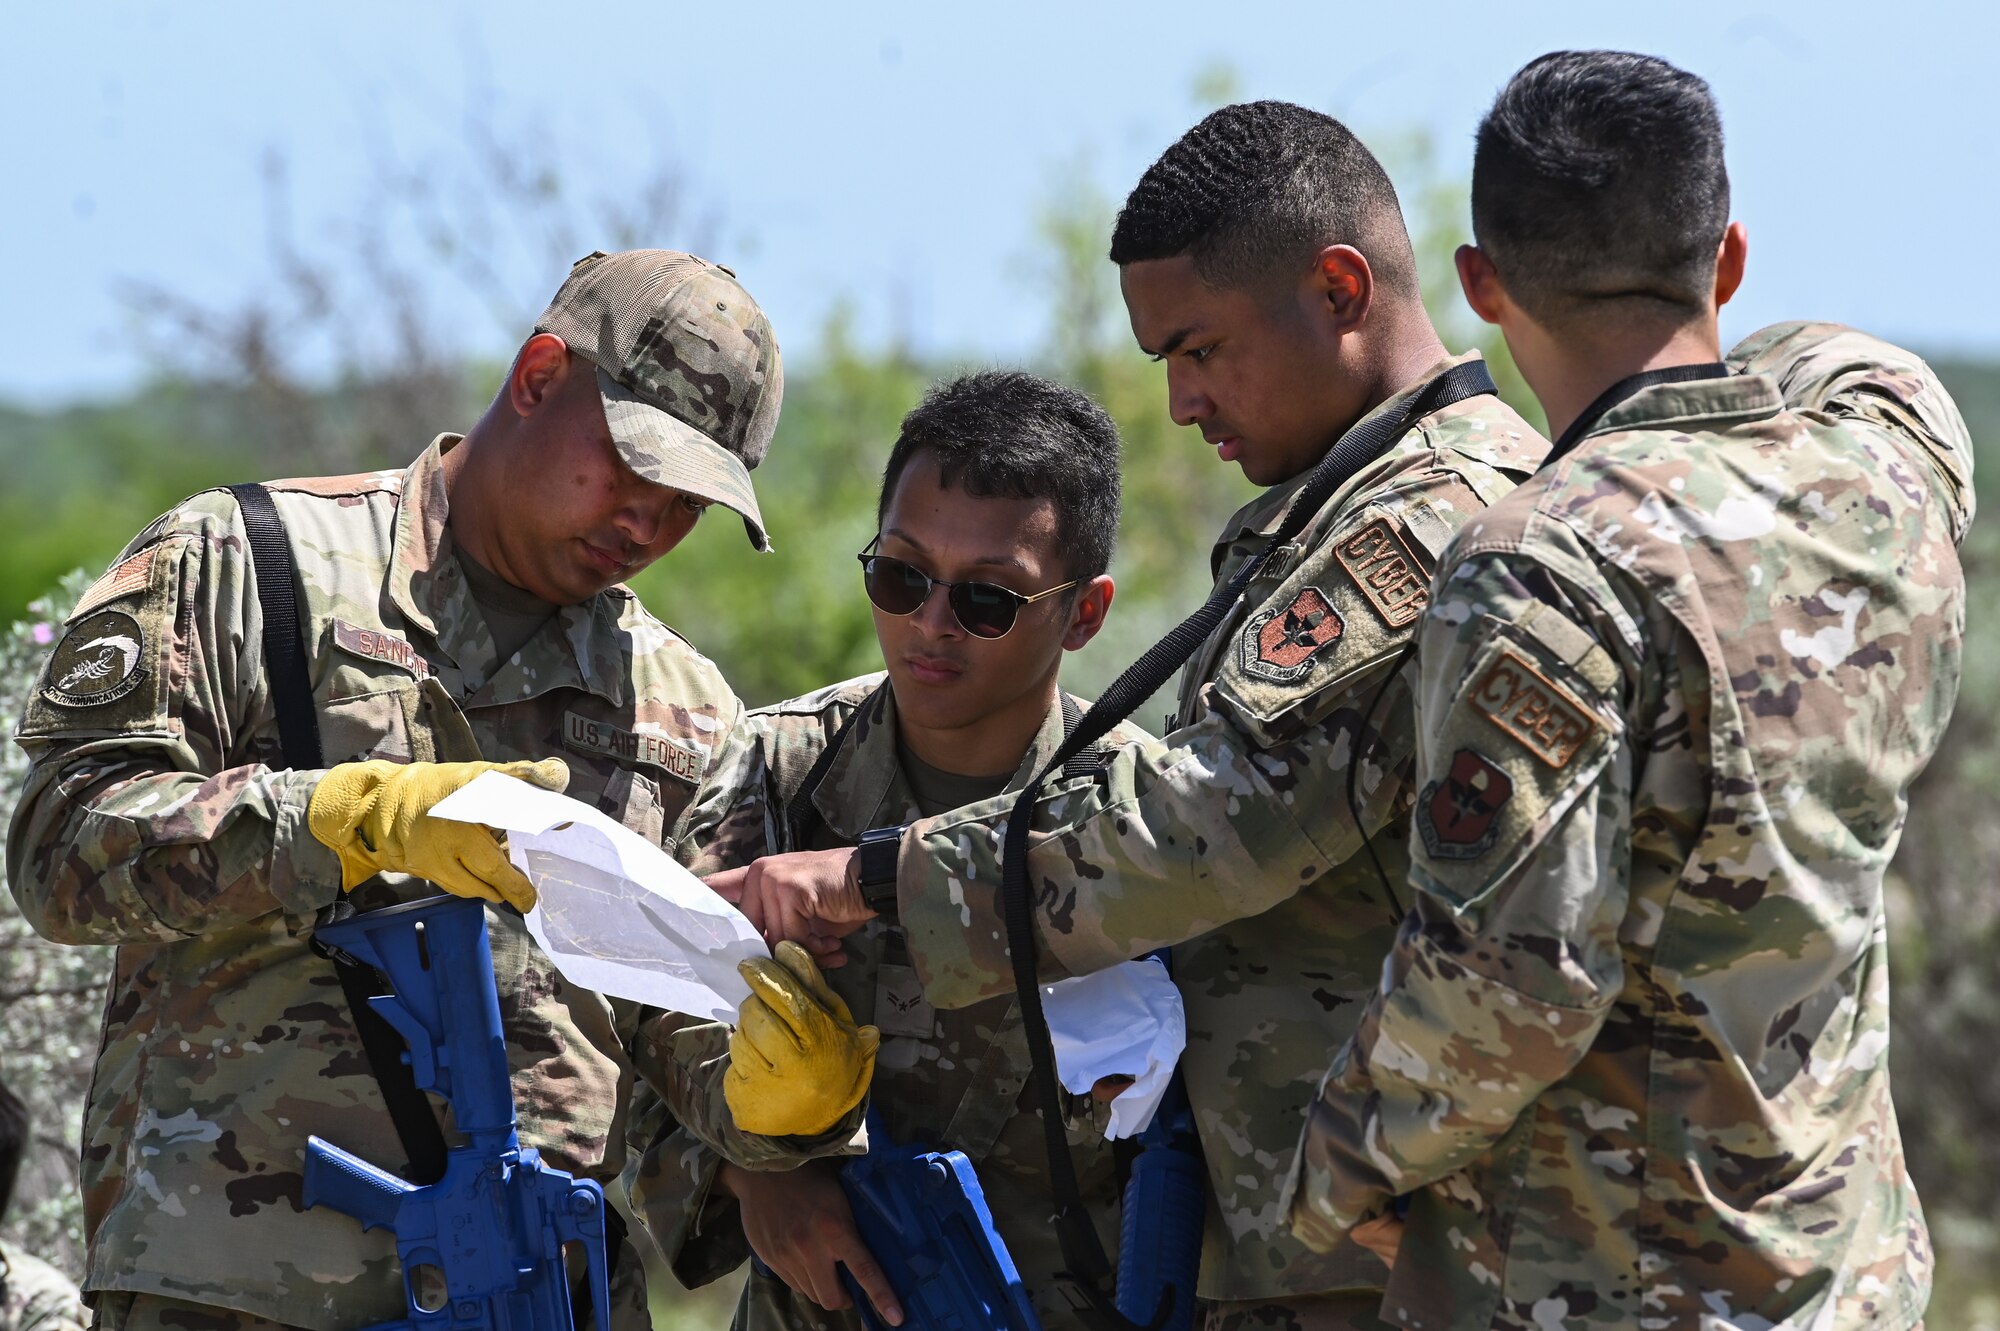 U.S. Air Force Airmen from the 47th Mission Support Group look over a map of the surrounding area during a training exercise at Laughlin Air Force Base, Texas, on April 28, 2023